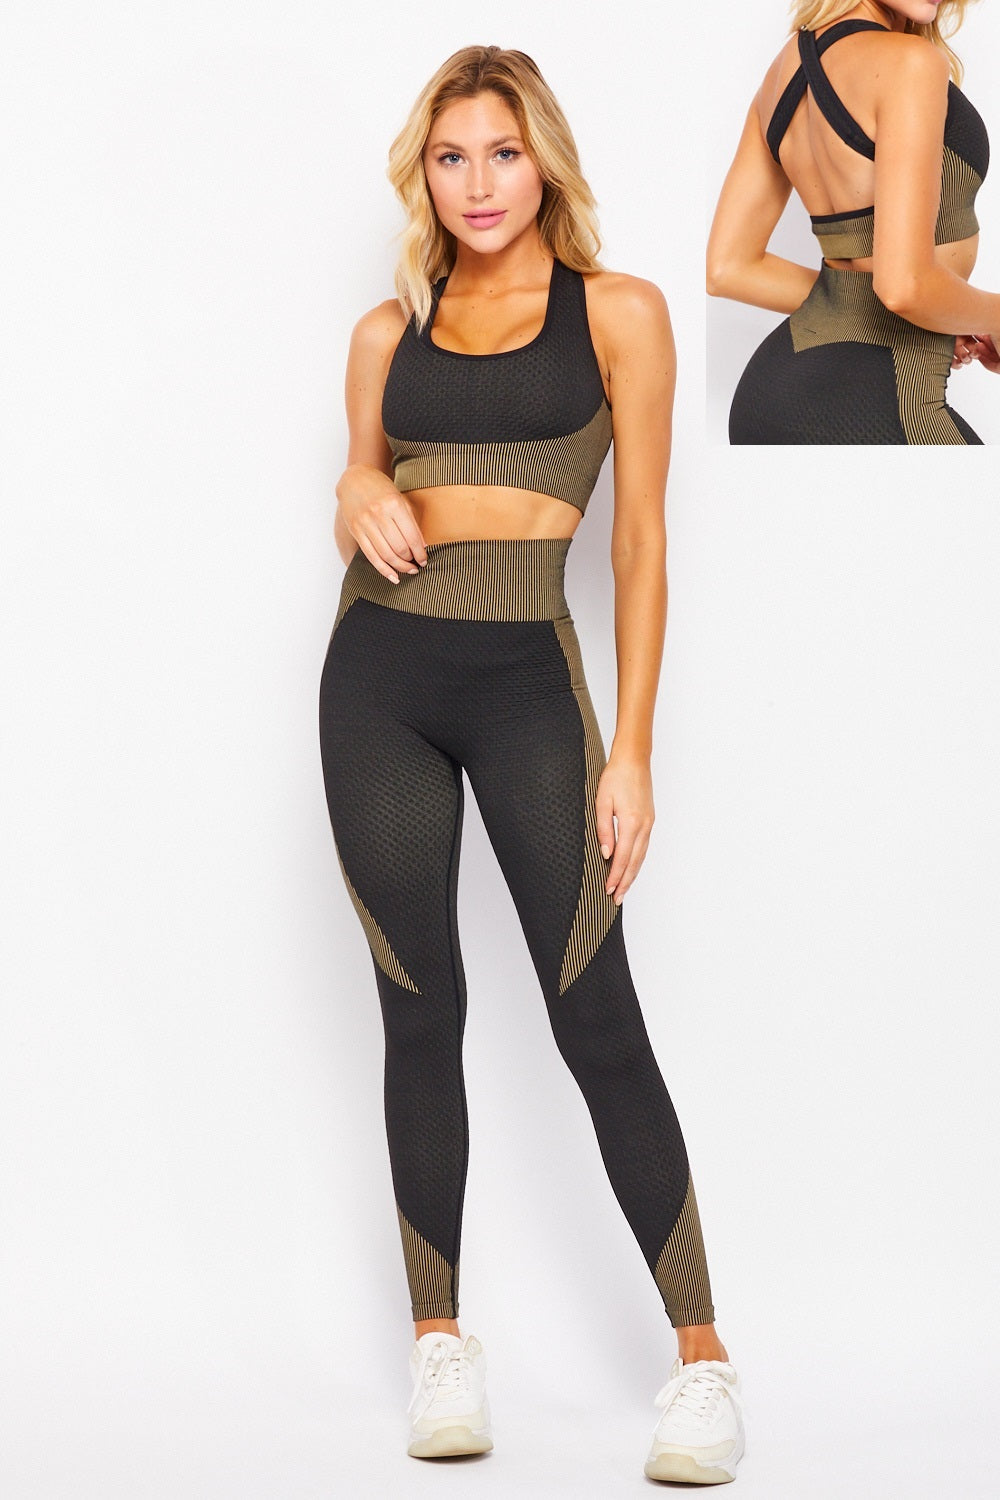 LA7 Ribbed Workout Sets for Women 2 Piece Gym Outfits Crop Tops